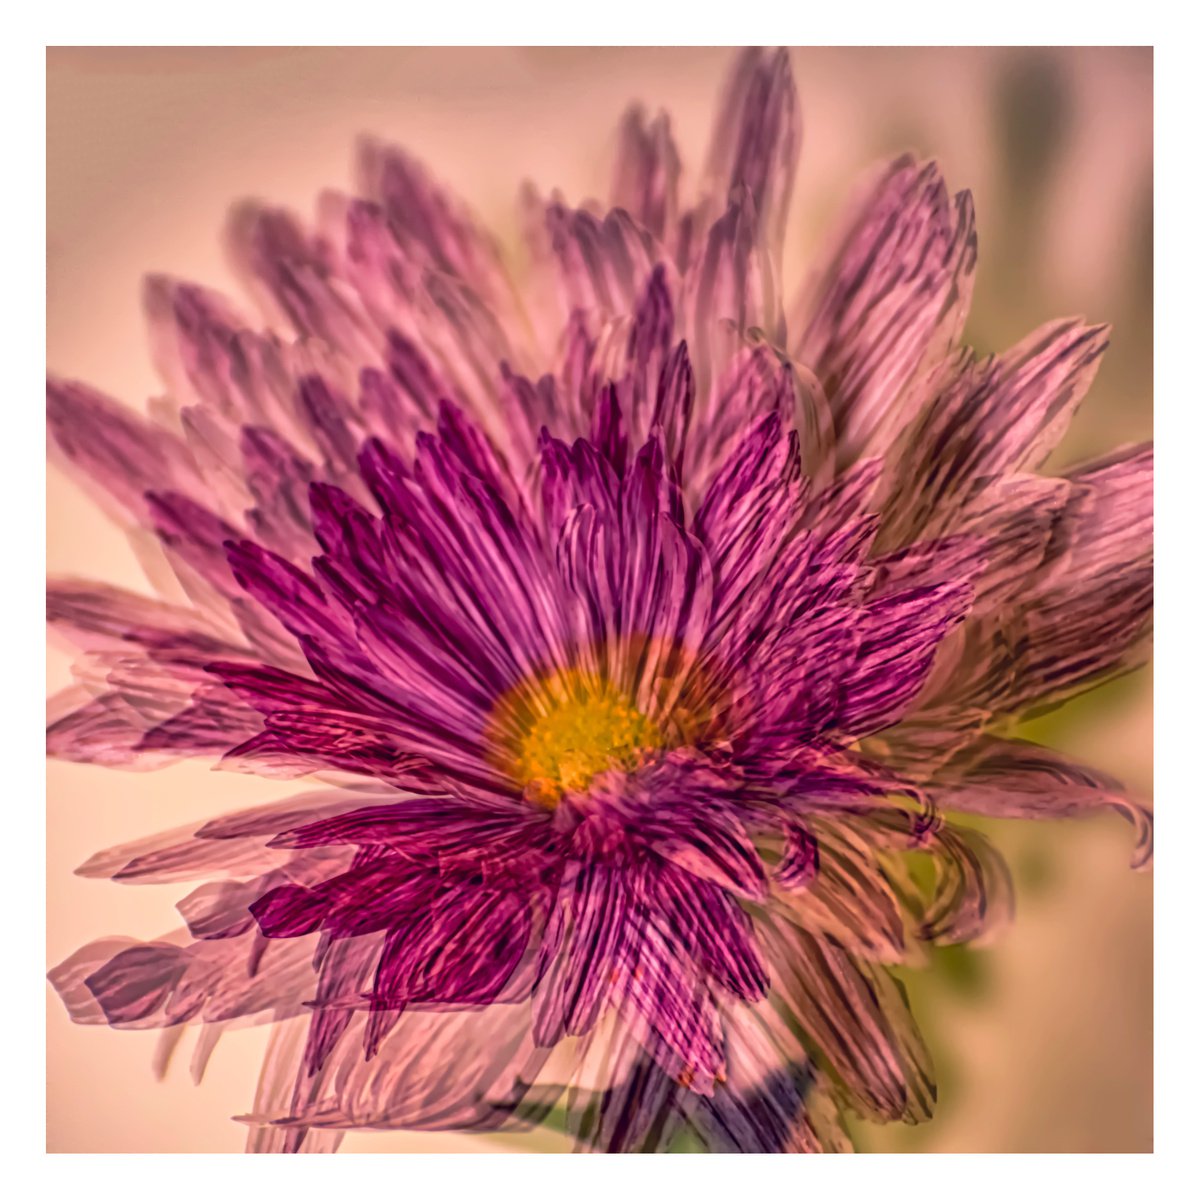 Abstract Flowers #1. Limited Edition 1/25 12x12 inch Photographic Print. by Graham Briggs